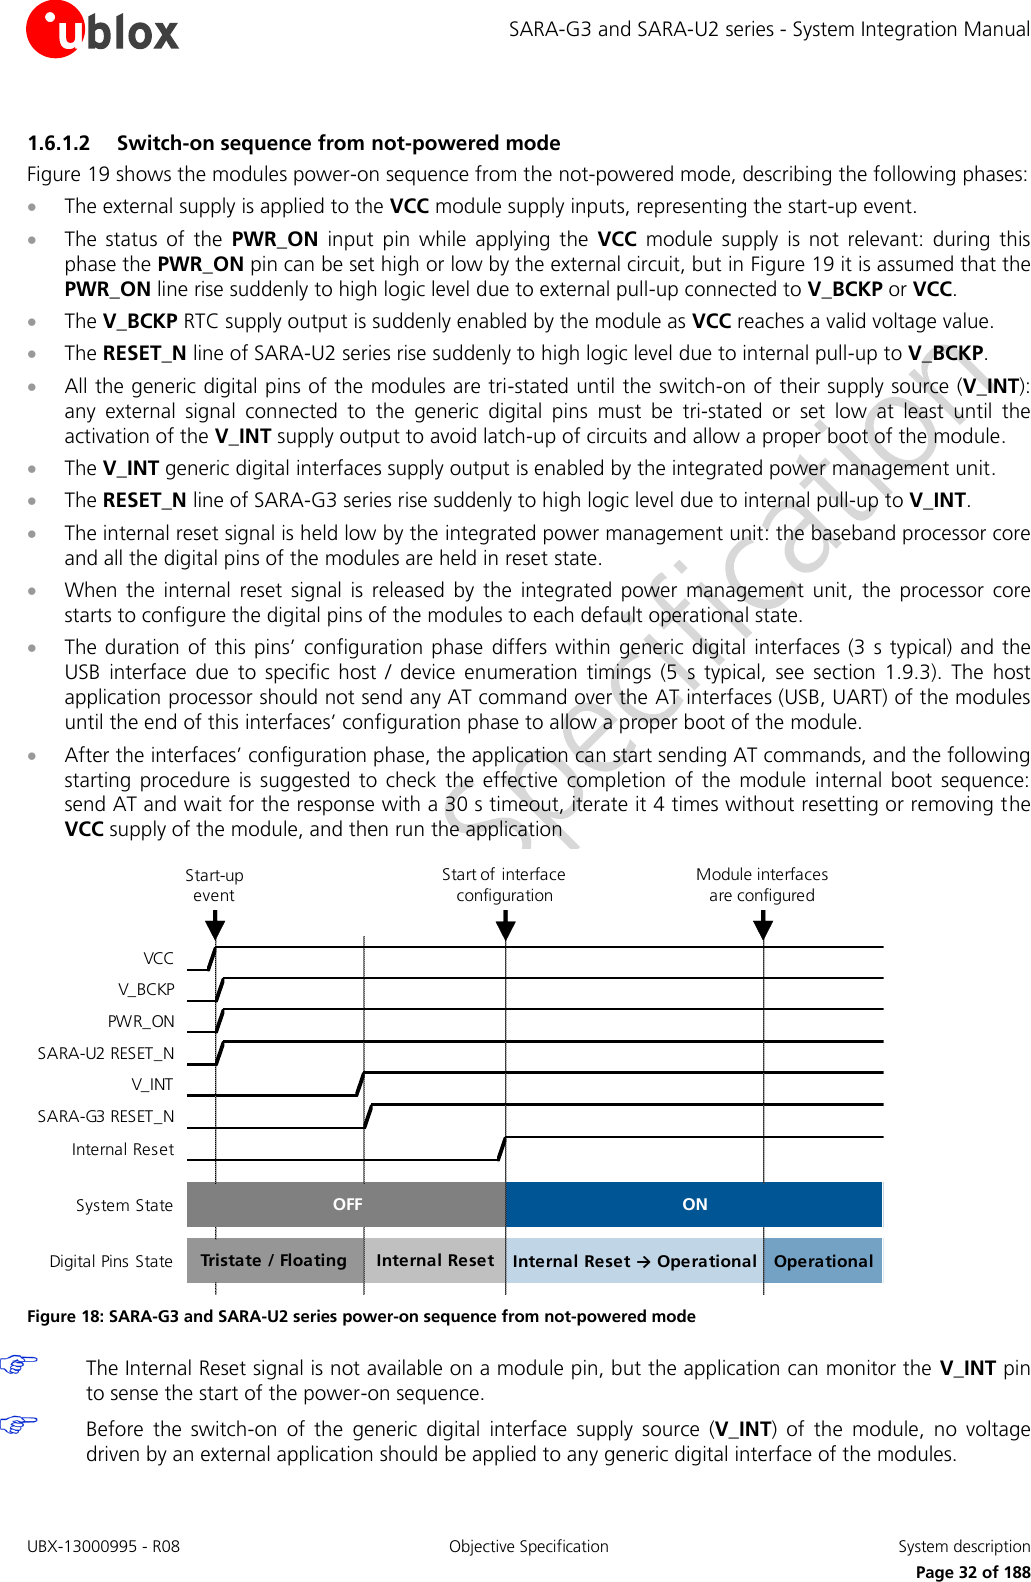 SARA-G3 and SARA-U2 series - System Integration Manual UBX-13000995 - R08  Objective Specification  System description     Page 32 of 188 1.6.1.2 Switch-on sequence from not-powered mode Figure 19 shows the modules power-on sequence from the not-powered mode, describing the following phases:  The external supply is applied to the VCC module supply inputs, representing the start-up event.  The  status  of  the  PWR_ON  input  pin  while  applying  the  VCC  module  supply  is  not  relevant:  during  this phase the PWR_ON pin can be set high or low by the external circuit, but in Figure 19 it is assumed that the PWR_ON line rise suddenly to high logic level due to external pull-up connected to V_BCKP or VCC.  The V_BCKP RTC supply output is suddenly enabled by the module as VCC reaches a valid voltage value.  The RESET_N line of SARA-U2 series rise suddenly to high logic level due to internal pull-up to V_BCKP.  All the generic digital pins of the modules are tri-stated until the switch-on of their supply source (V_INT): any  external  signal  connected  to  the  generic  digital  pins  must  be  tri-stated  or  set  low  at  least  until  the activation of the V_INT supply output to avoid latch-up of circuits and allow a proper boot of the module.  The V_INT generic digital interfaces supply output is enabled by the integrated power management unit.  The RESET_N line of SARA-G3 series rise suddenly to high logic level due to internal pull-up to V_INT.  The internal reset signal is held low by the integrated power management unit: the baseband processor core and all the digital pins of the modules are held in reset state.   When  the  internal  reset  signal  is  released  by  the  integrated  power  management  unit,  the  processor  core starts to configure the digital pins of the modules to each default operational state.  The duration  of this  pins’  configuration  phase differs within generic  digital interfaces (3  s typical) and  the USB  interface  due  to  specific  host  /  device  enumeration  timings  (5  s  typical,  see  section  1.9.3).  The  host application processor should not send any AT command over the AT interfaces (USB, UART) of the modules until the end of this interfaces’ configuration phase to allow a proper boot of the module.  After the interfaces’ configuration phase, the application can start sending AT commands, and the following starting  procedure  is  suggested  to  check  the  effective  completion  of  the  module  internal  boot  sequence: send AT and wait for the response with a 30 s timeout, iterate it 4 times without resetting or removing the VCC supply of the module, and then run the application  VCCV_BCKPPWR_ONSARA-U2 RESET_NV_INTSARA-G3 RESET_NInternal ResetSystem StateDigital Pins StateInternal Reset → Operational OperationalTristate / Floating OFFONInternal Reset0 ms~35 ms~3 sStart of interface configurationModule interfaces are configuredStart-up event Figure 18: SARA-G3 and SARA-U2 series power-on sequence from not-powered mode  The Internal Reset signal is not available on a module pin, but the application can monitor the  V_INT pin to sense the start of the power-on sequence.  Before  the  switch-on  of  the  generic  digital  interface  supply  source  (V_INT)  of  the  module,  no  voltage driven by an external application should be applied to any generic digital interface of the modules.  